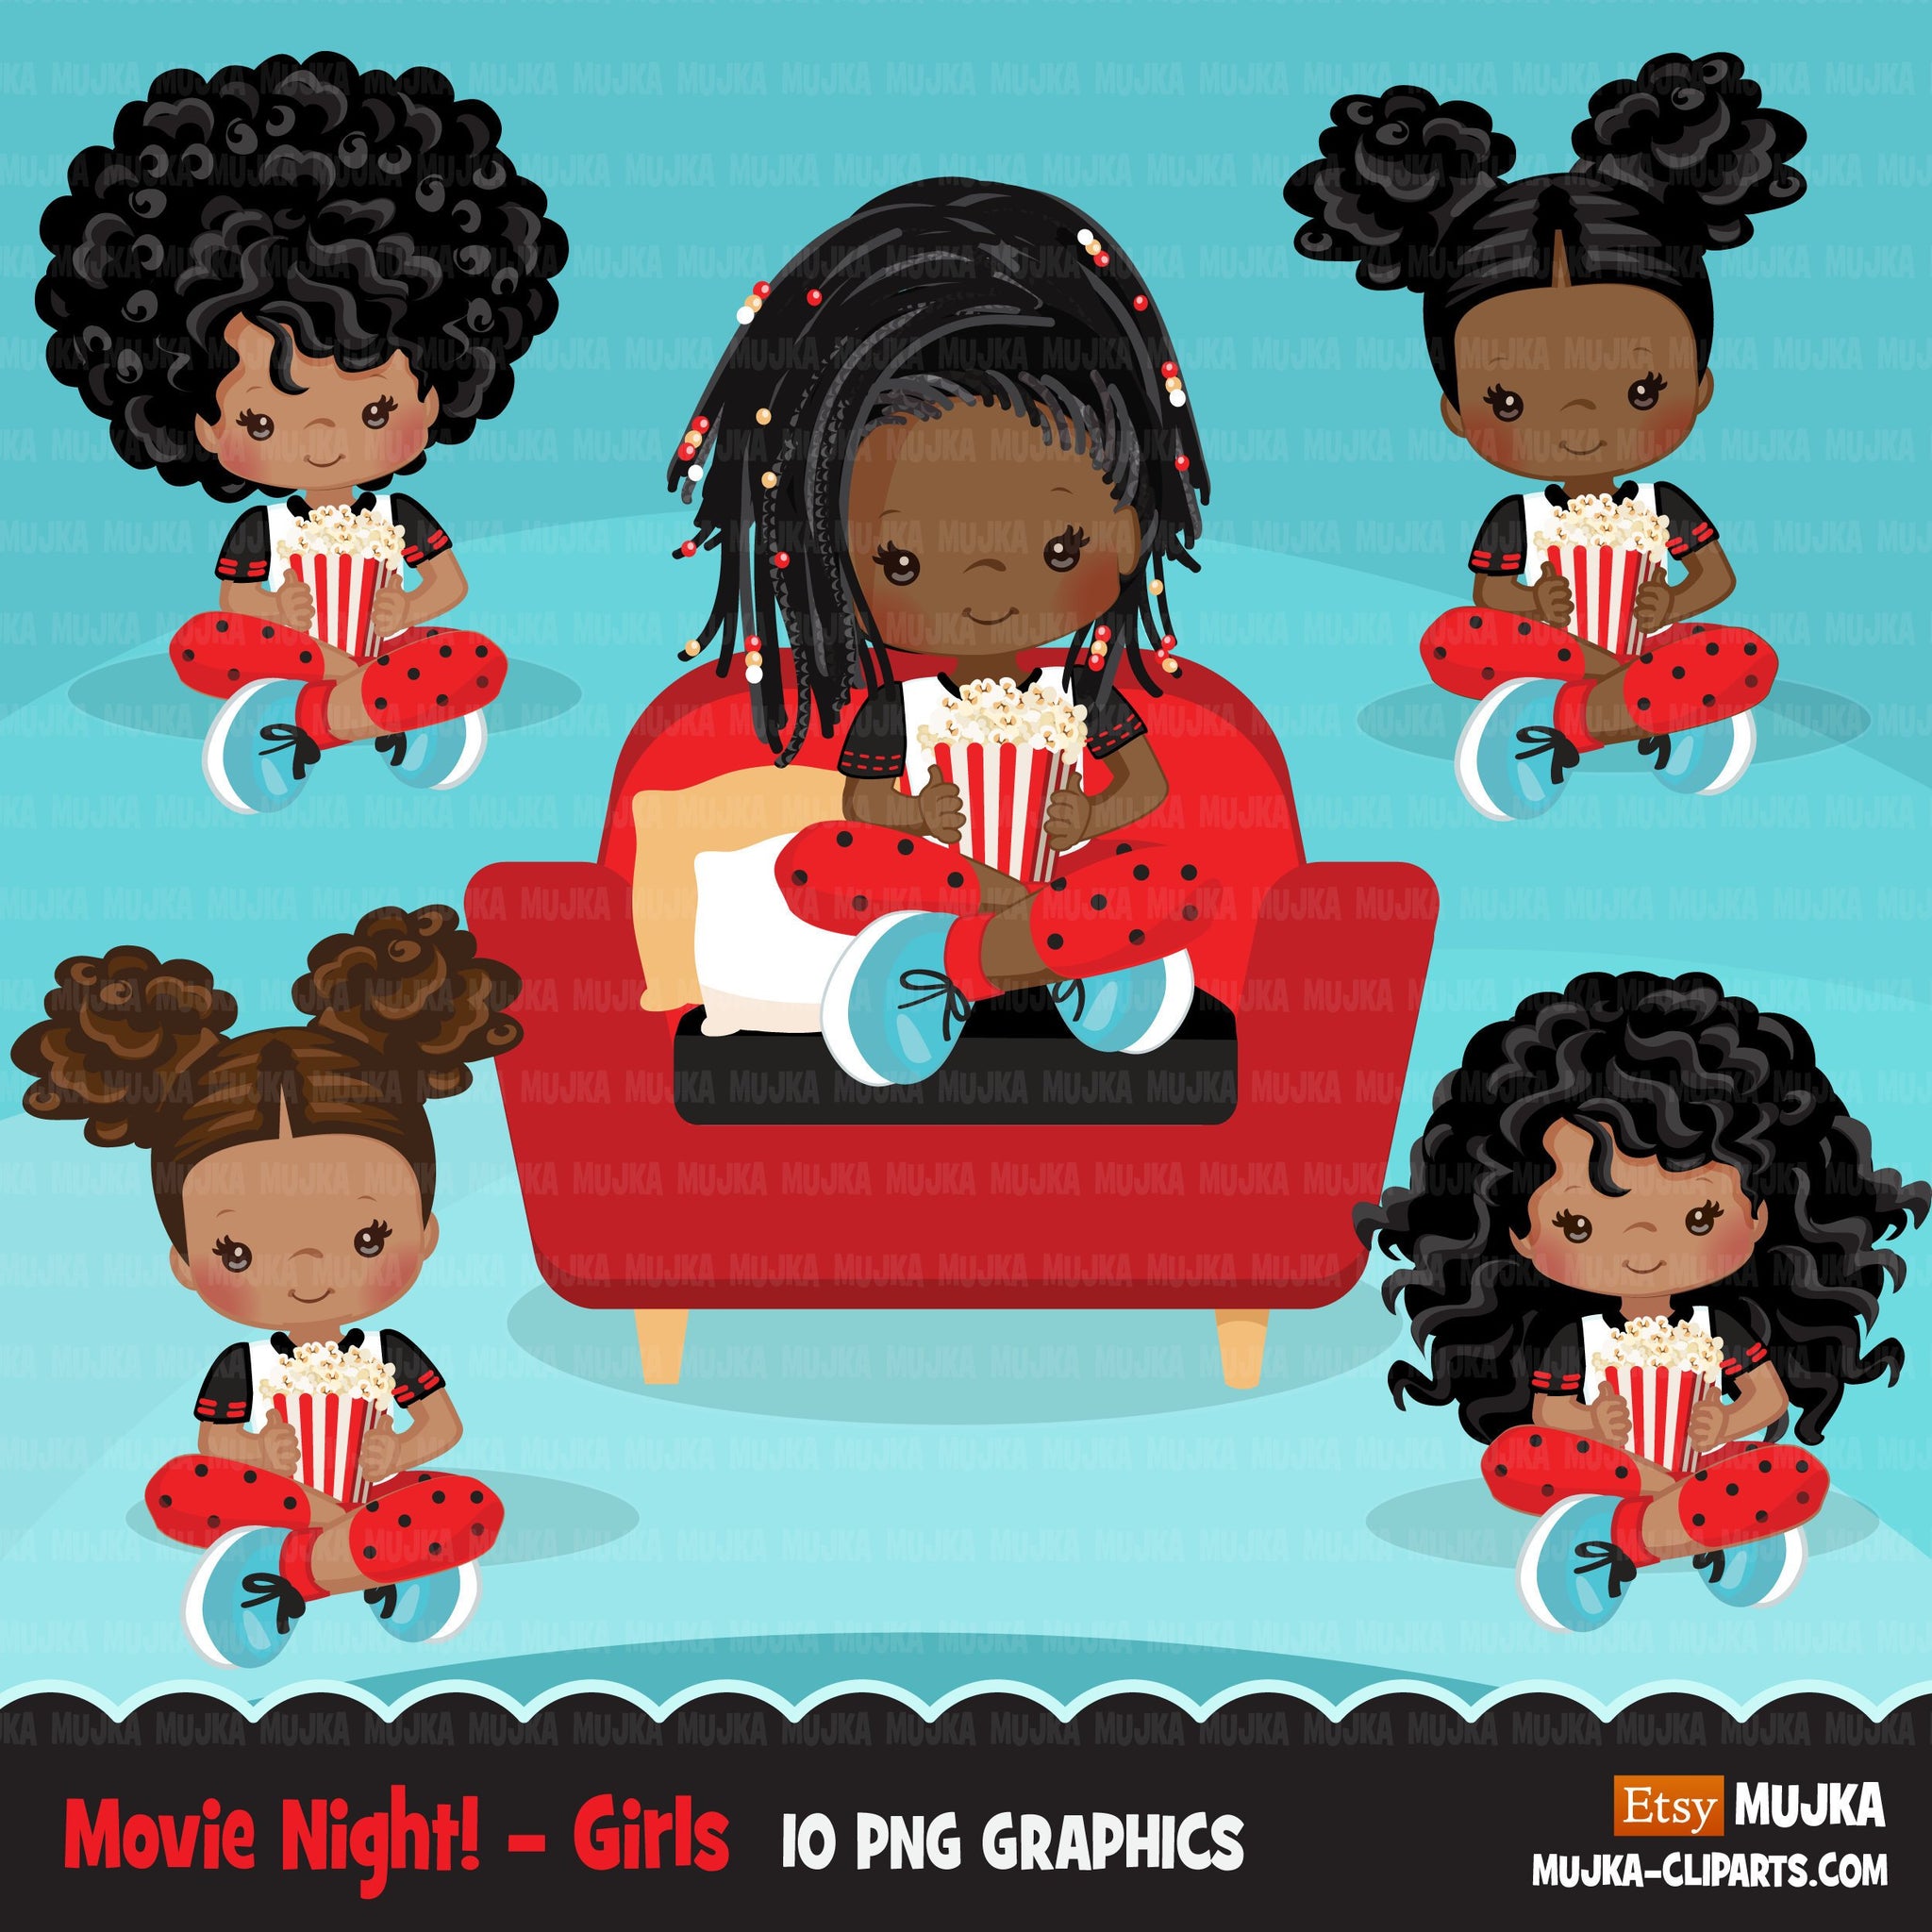 Movie night Clipart, movie birthday party, black girls graphics, popcorn, sleepover party Png clip art